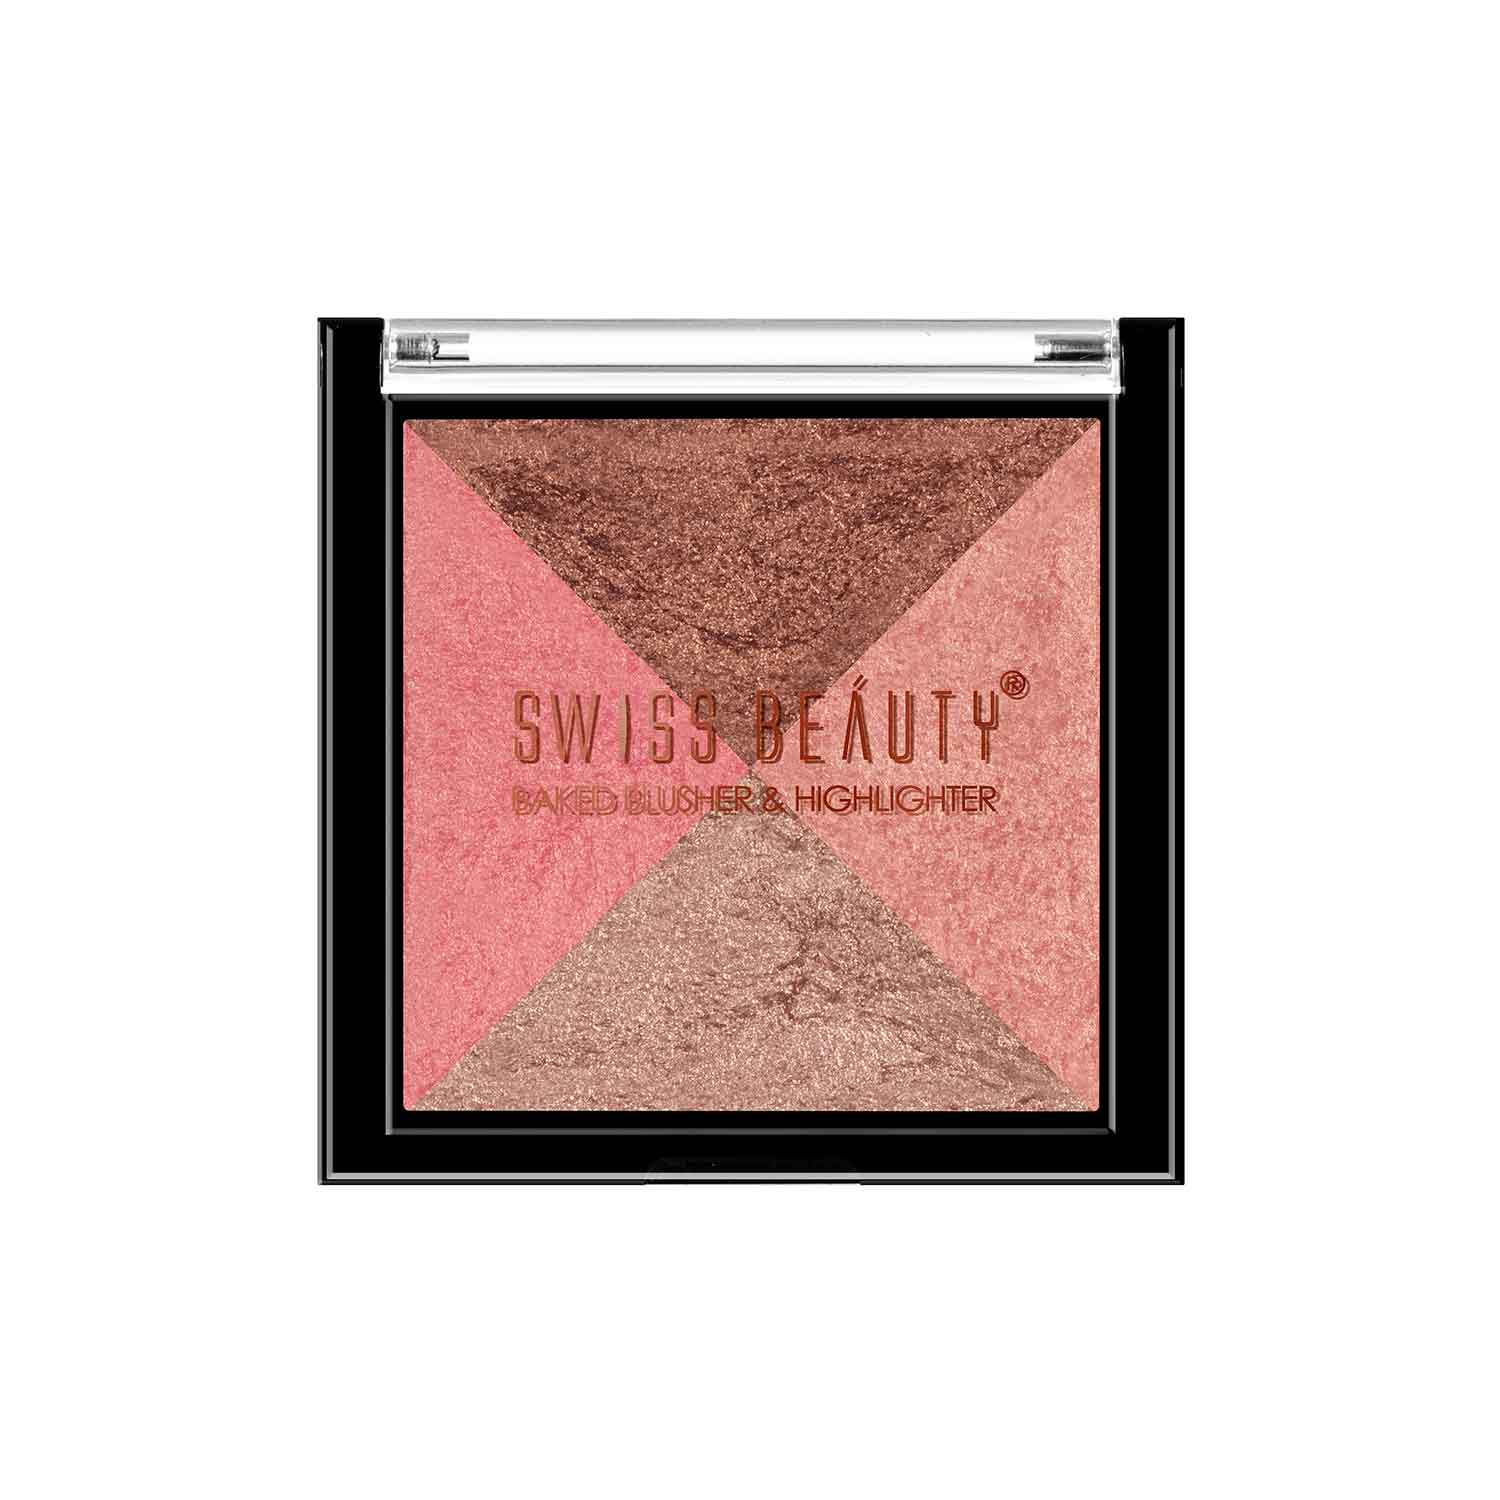 Swiss beauty 2-In 1- baked blusher and highlighter